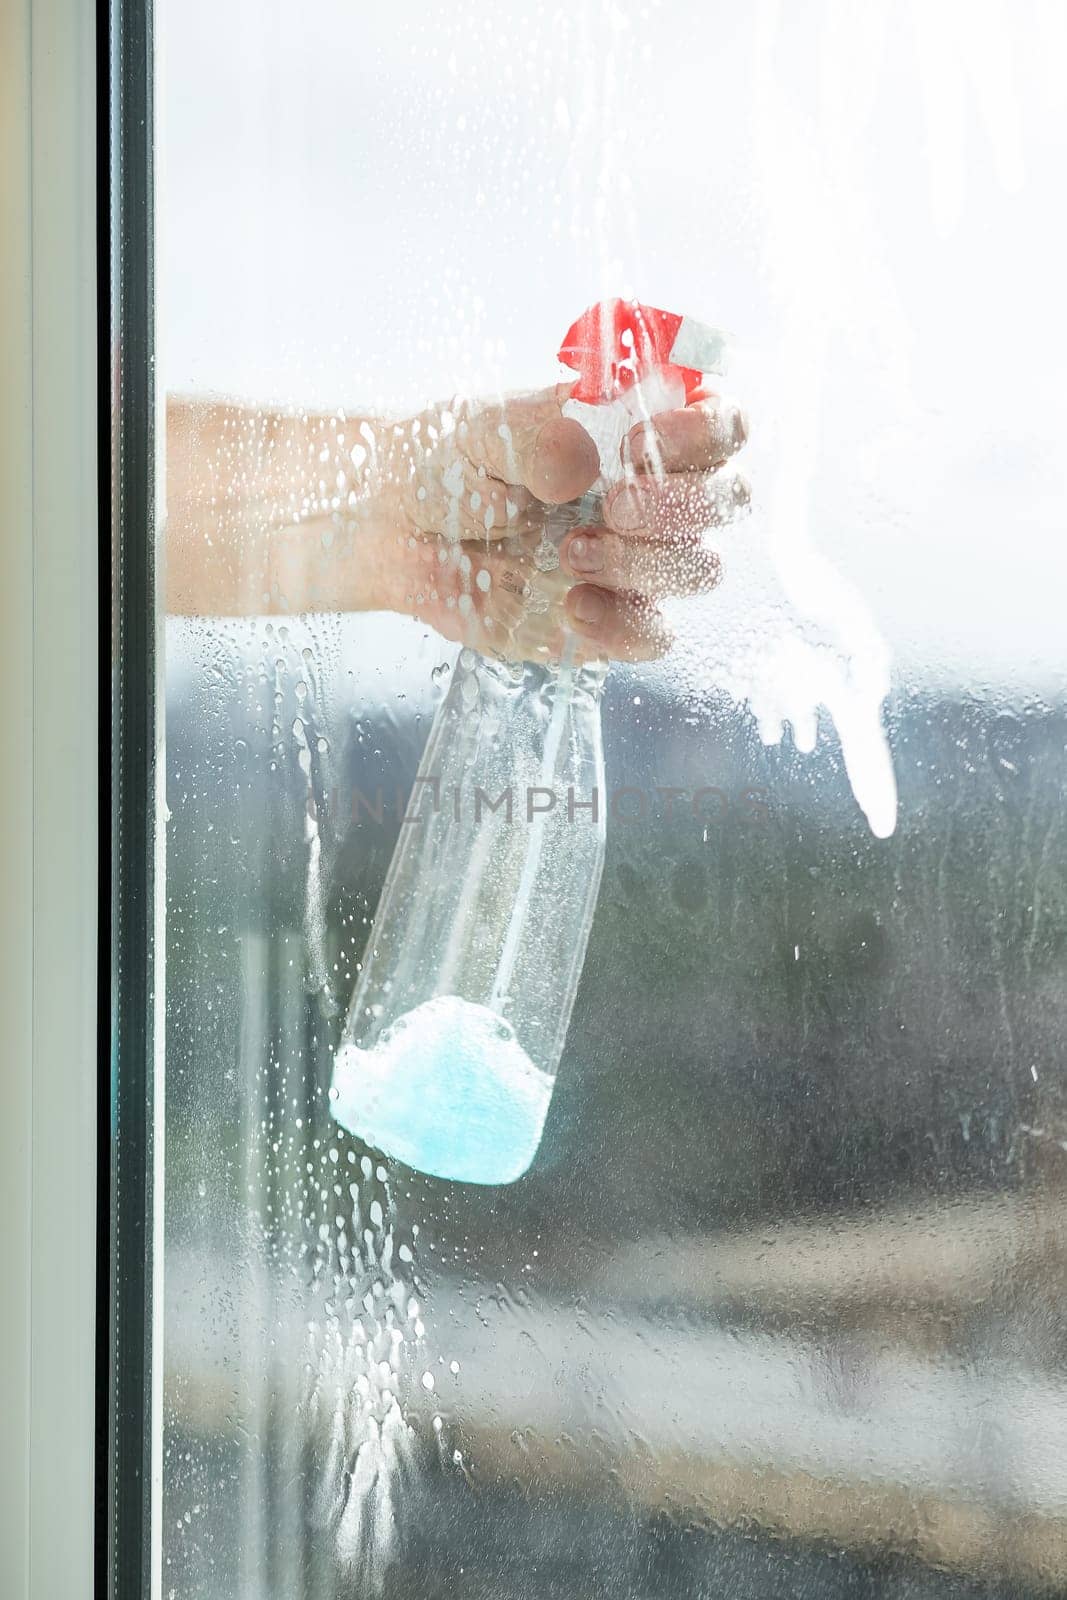 Cleaning windows with special rag and cleaner